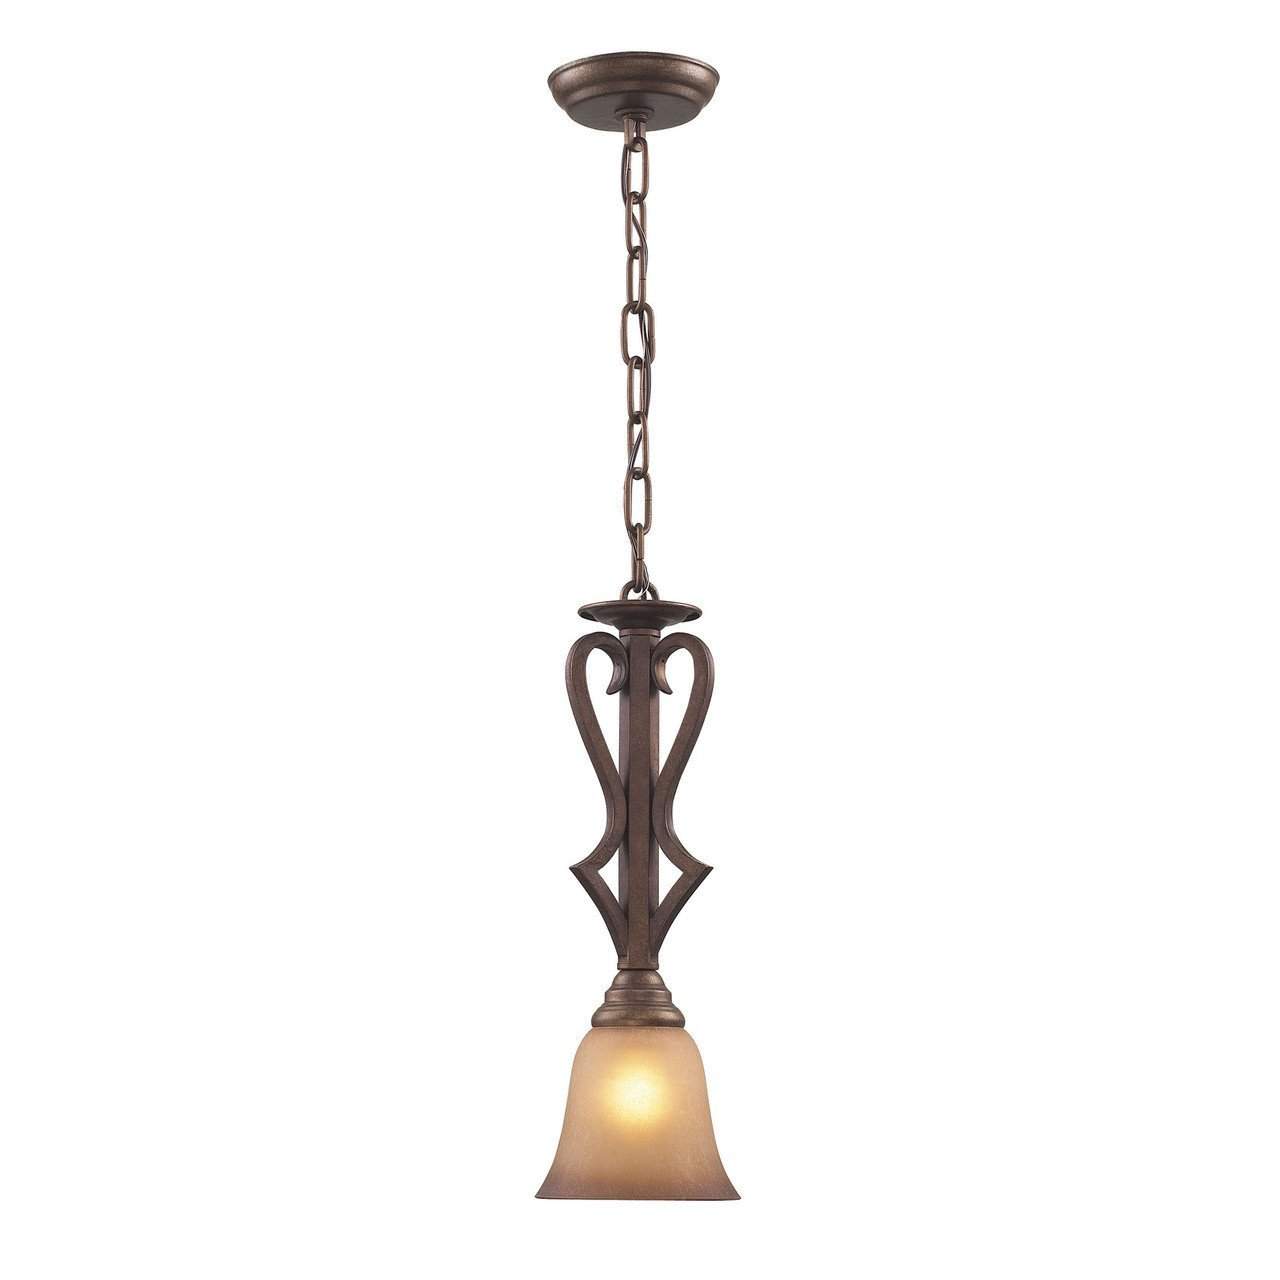 Elk Lighting, Inc. New Product  Lawrenceville 1 Light Pendant In Mocha With Antique Amber Glass 9325/1 Sold by VaasuHomes